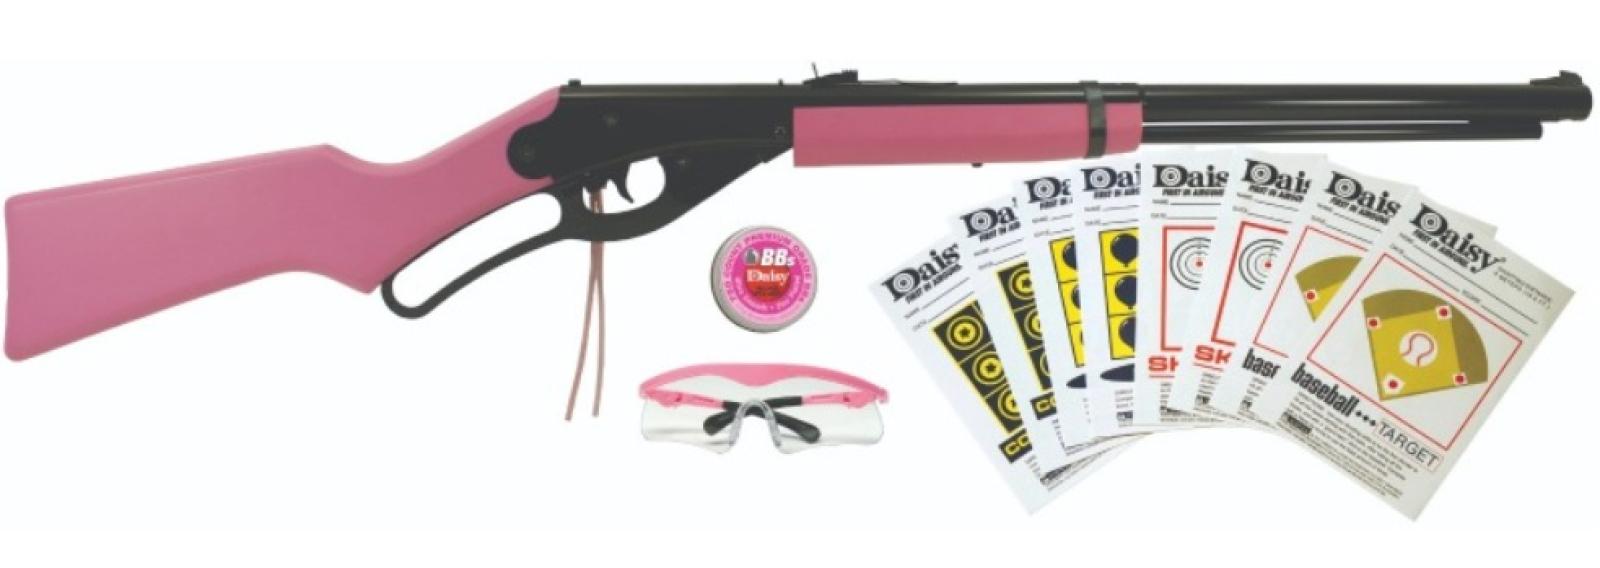 Daisy Red Ryder Fun Kit - Pink